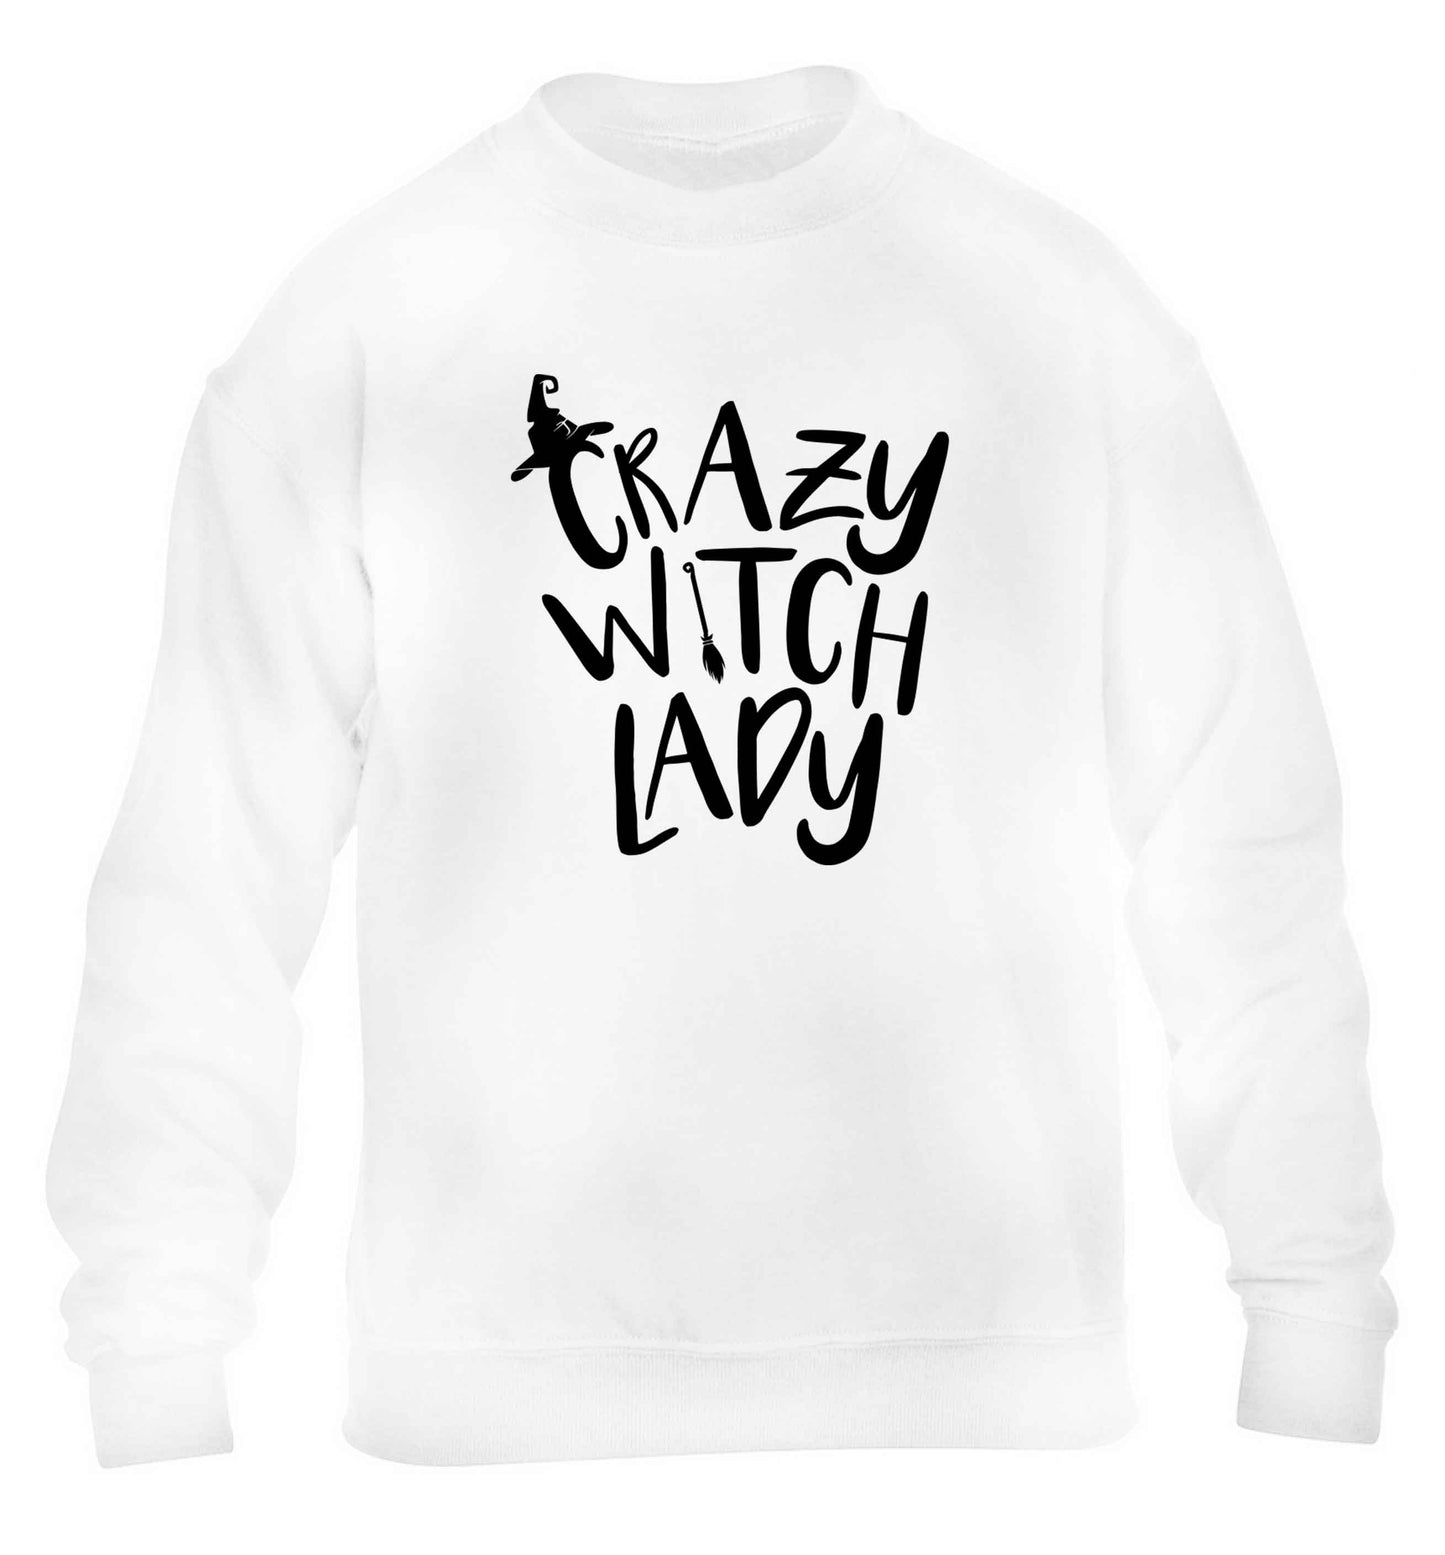 Crazy witch lady children's white sweater 12-13 Years